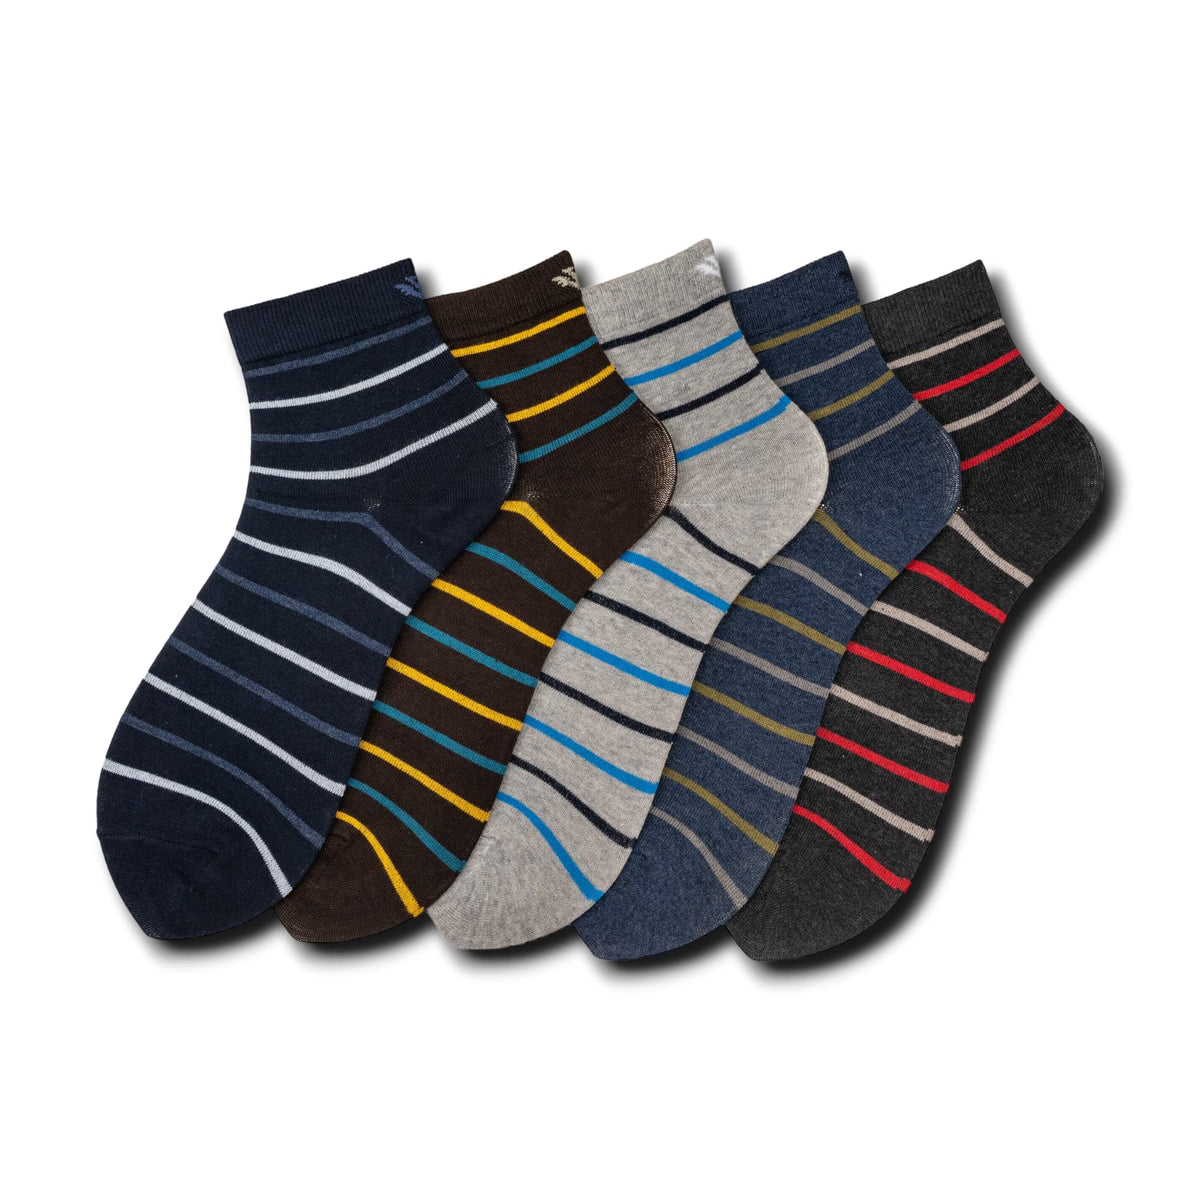 Young Wings Men's Multi Colour Cotton Fabric Design Ankle Length Socks - Pack of 5, Style no. M1-2137 N